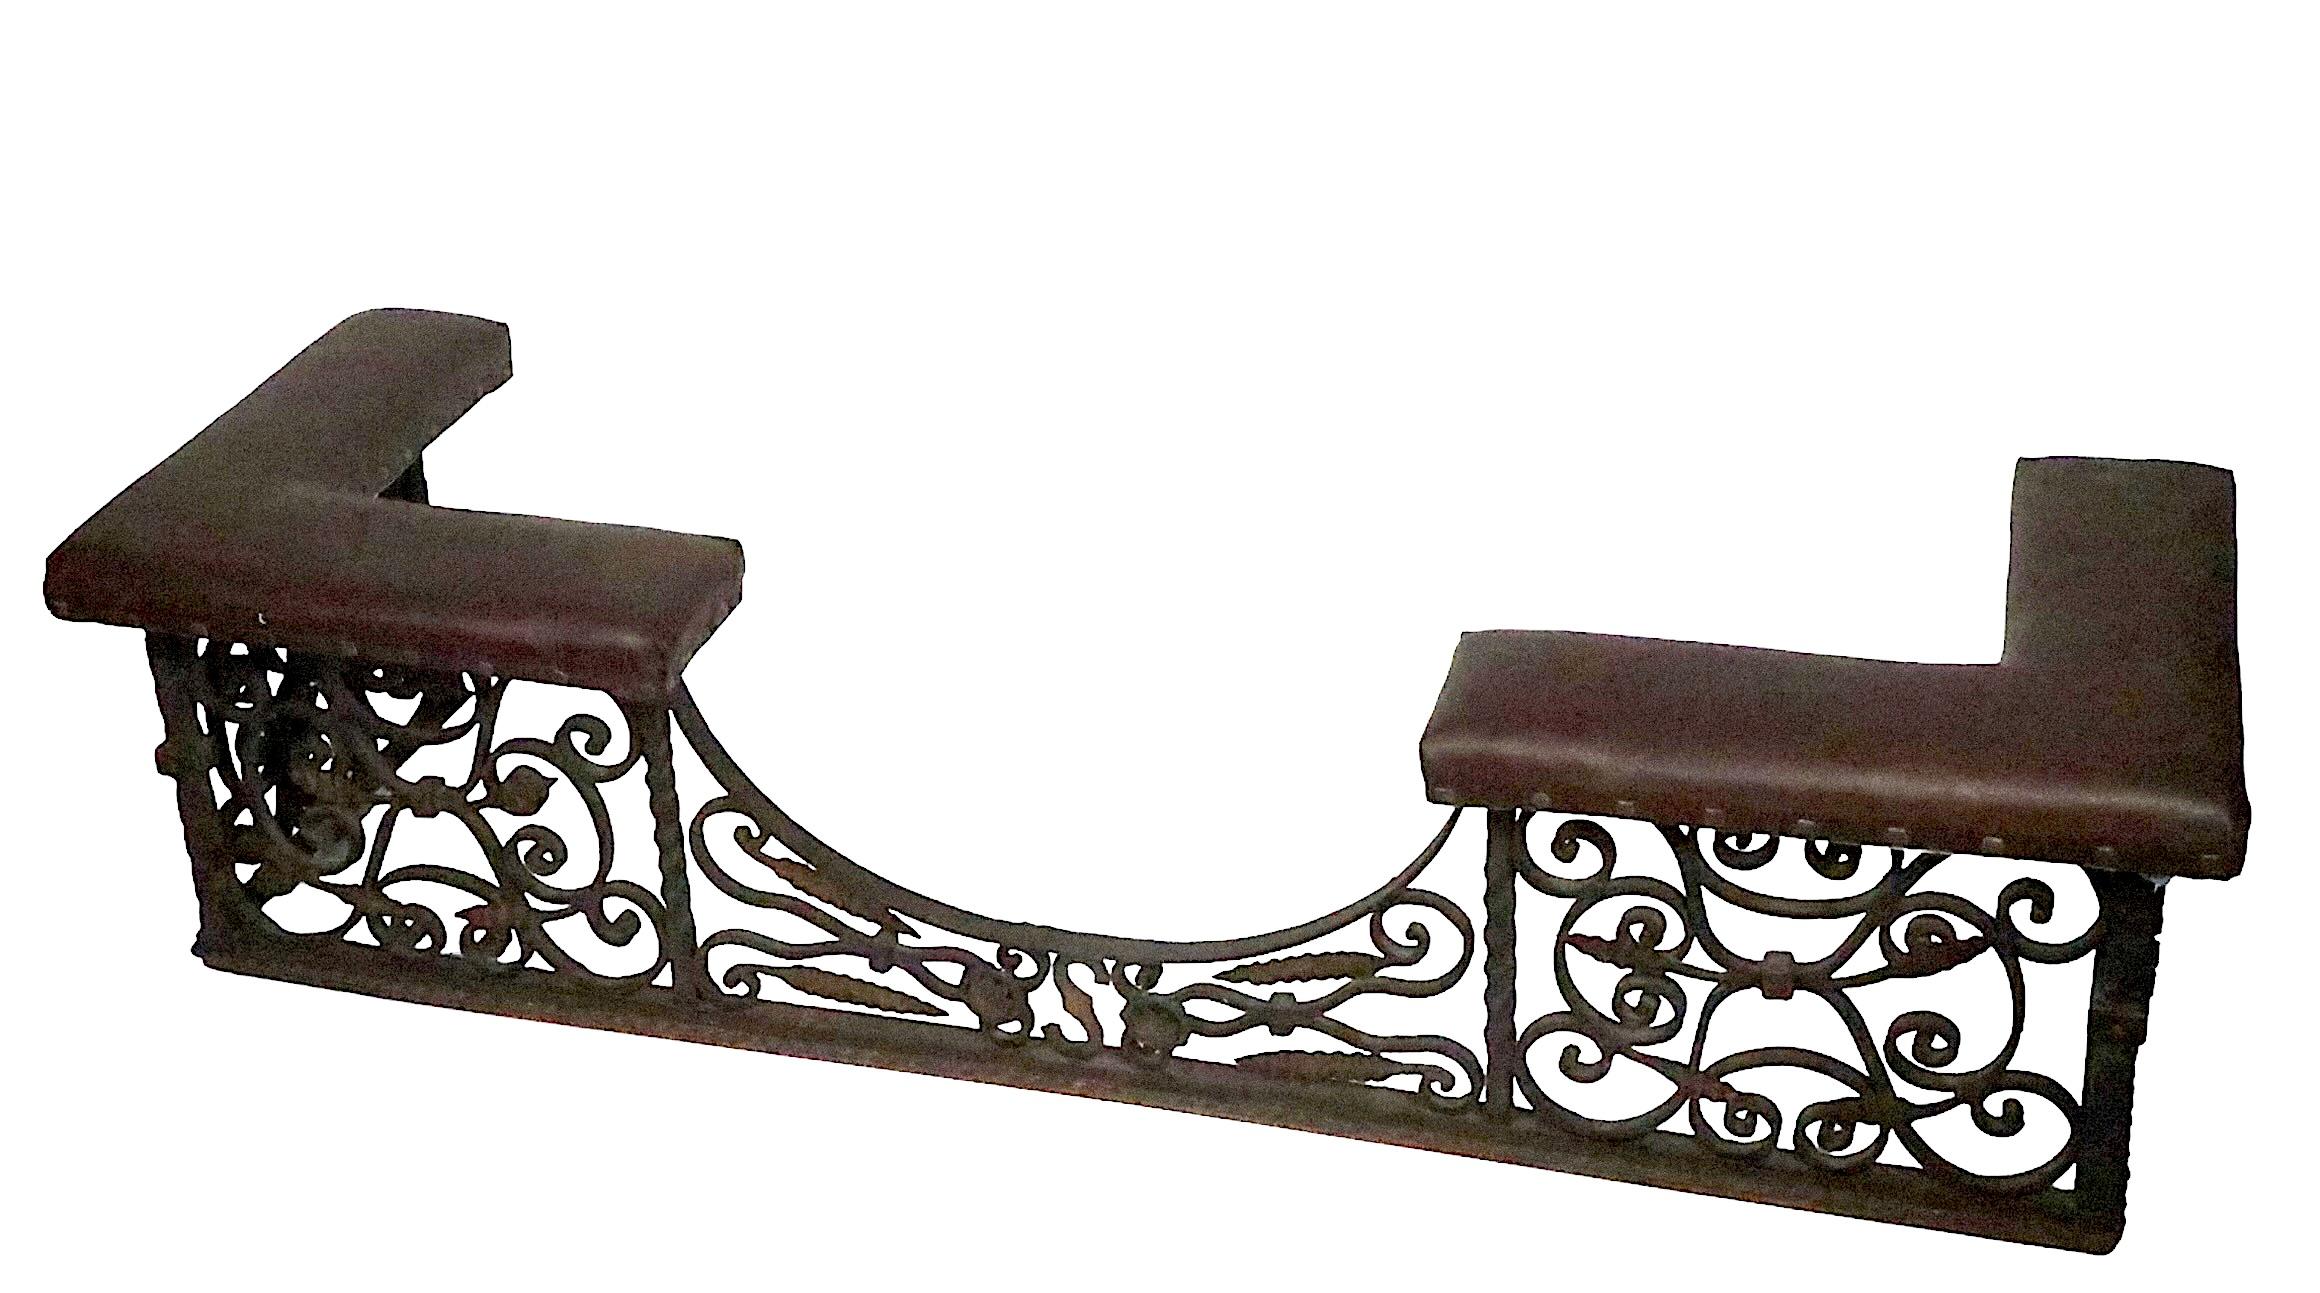 Upholstery Antique Arts and Crafts Gothic Spanish Style Wrought Iron Bench Club Fender For Sale